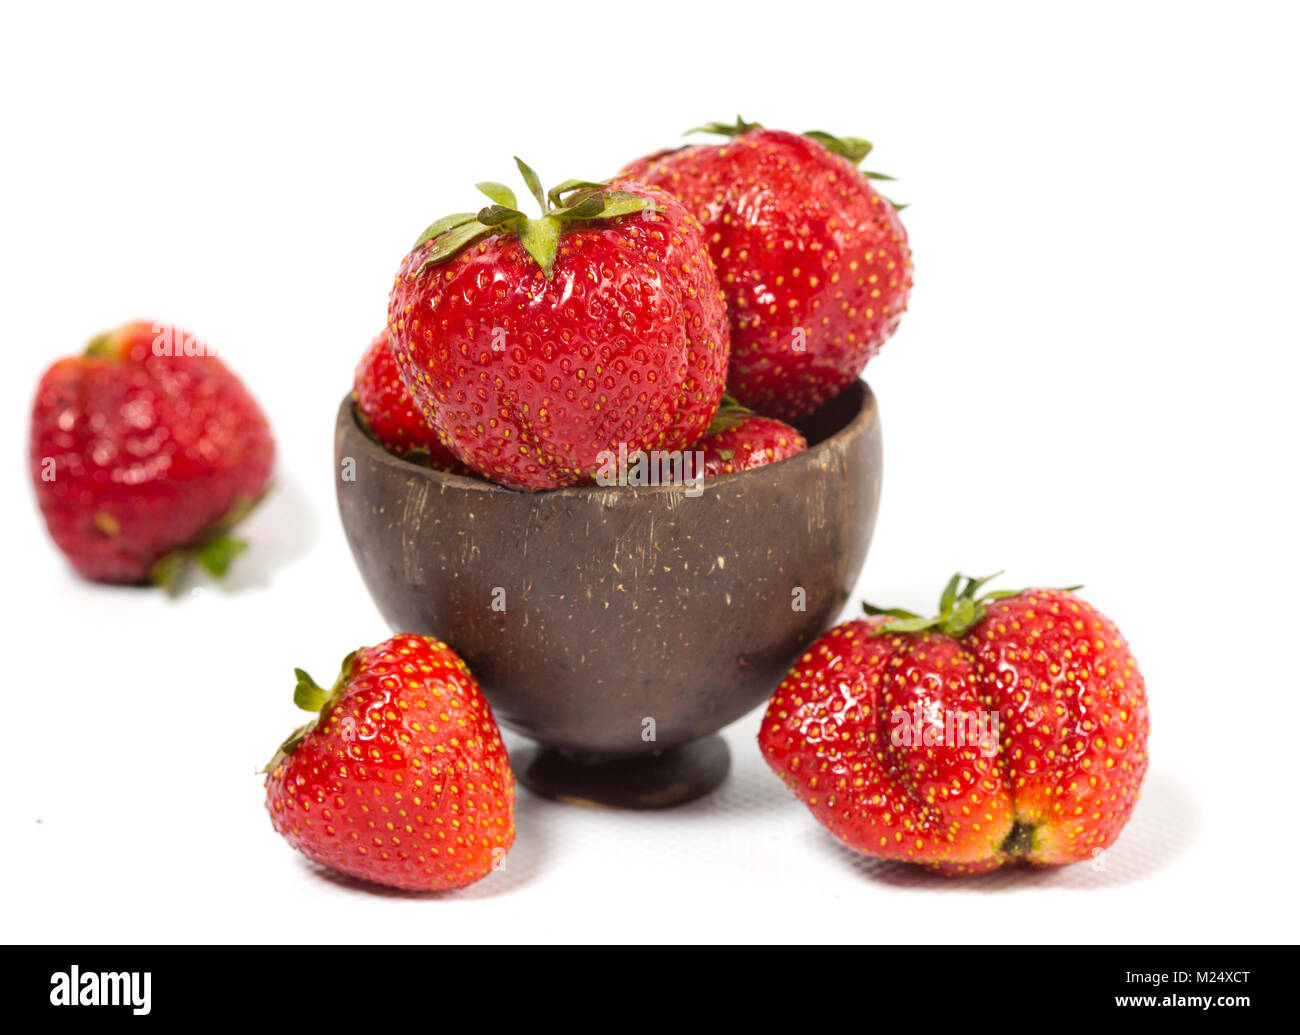 strawberry, ripe berries drop out of a wooden bowl Stock Photo